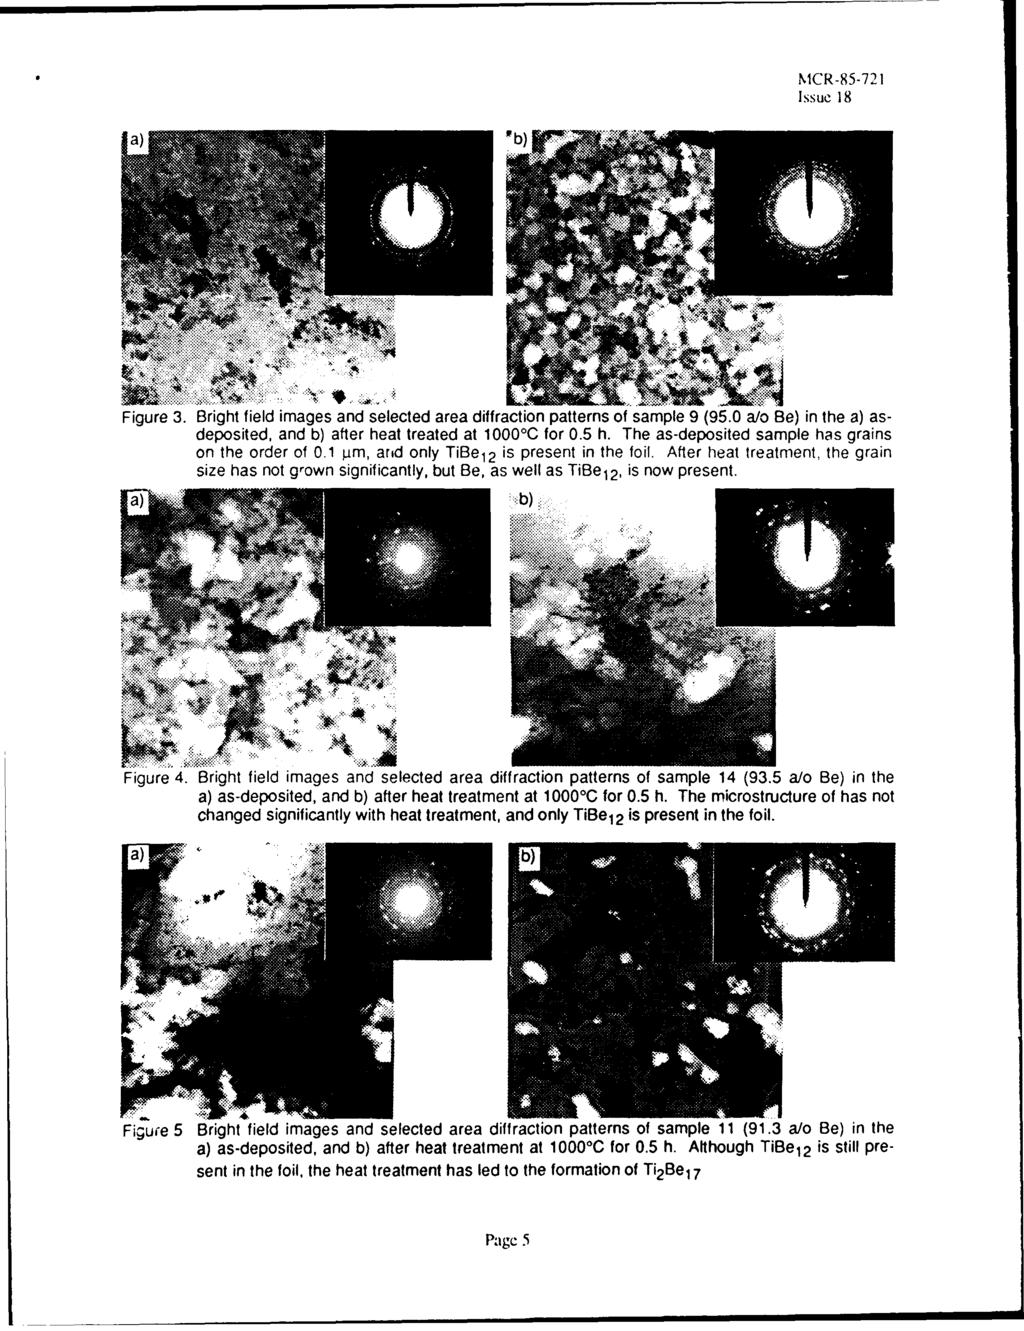 NMCR-85-721 MM Figure 3. Bright field images and selected area diffraction patterns of sample 9 (95.0 a/o Be) in the a) asdeposited, and b) after heat treated at 1000 0 C for 0.5 h.